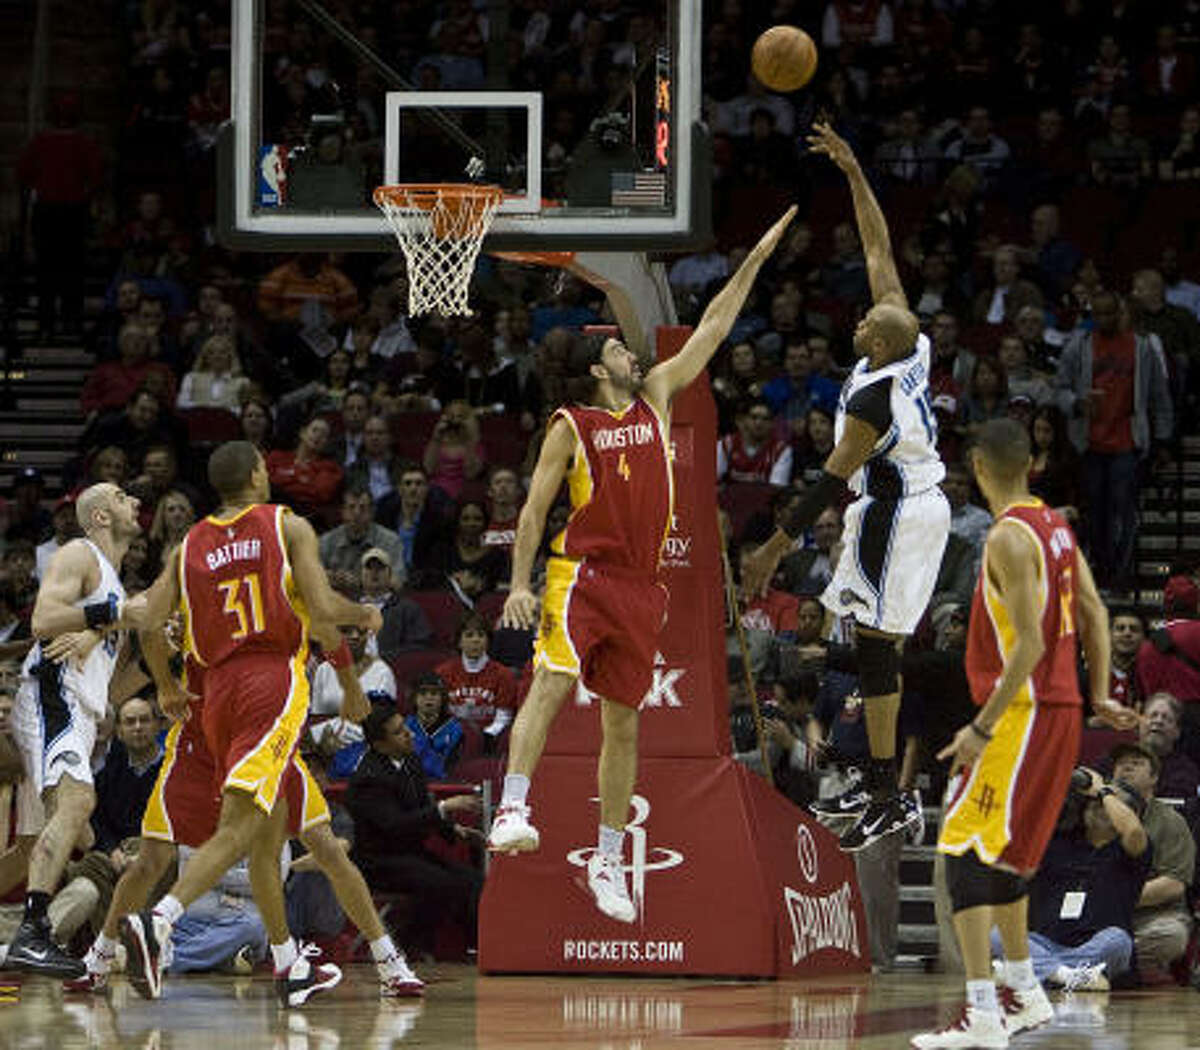 Orlando's Vince Carter, second from right, shoots over Rockets forward Luis Scola during Wednesday's game at the Toyota Center.